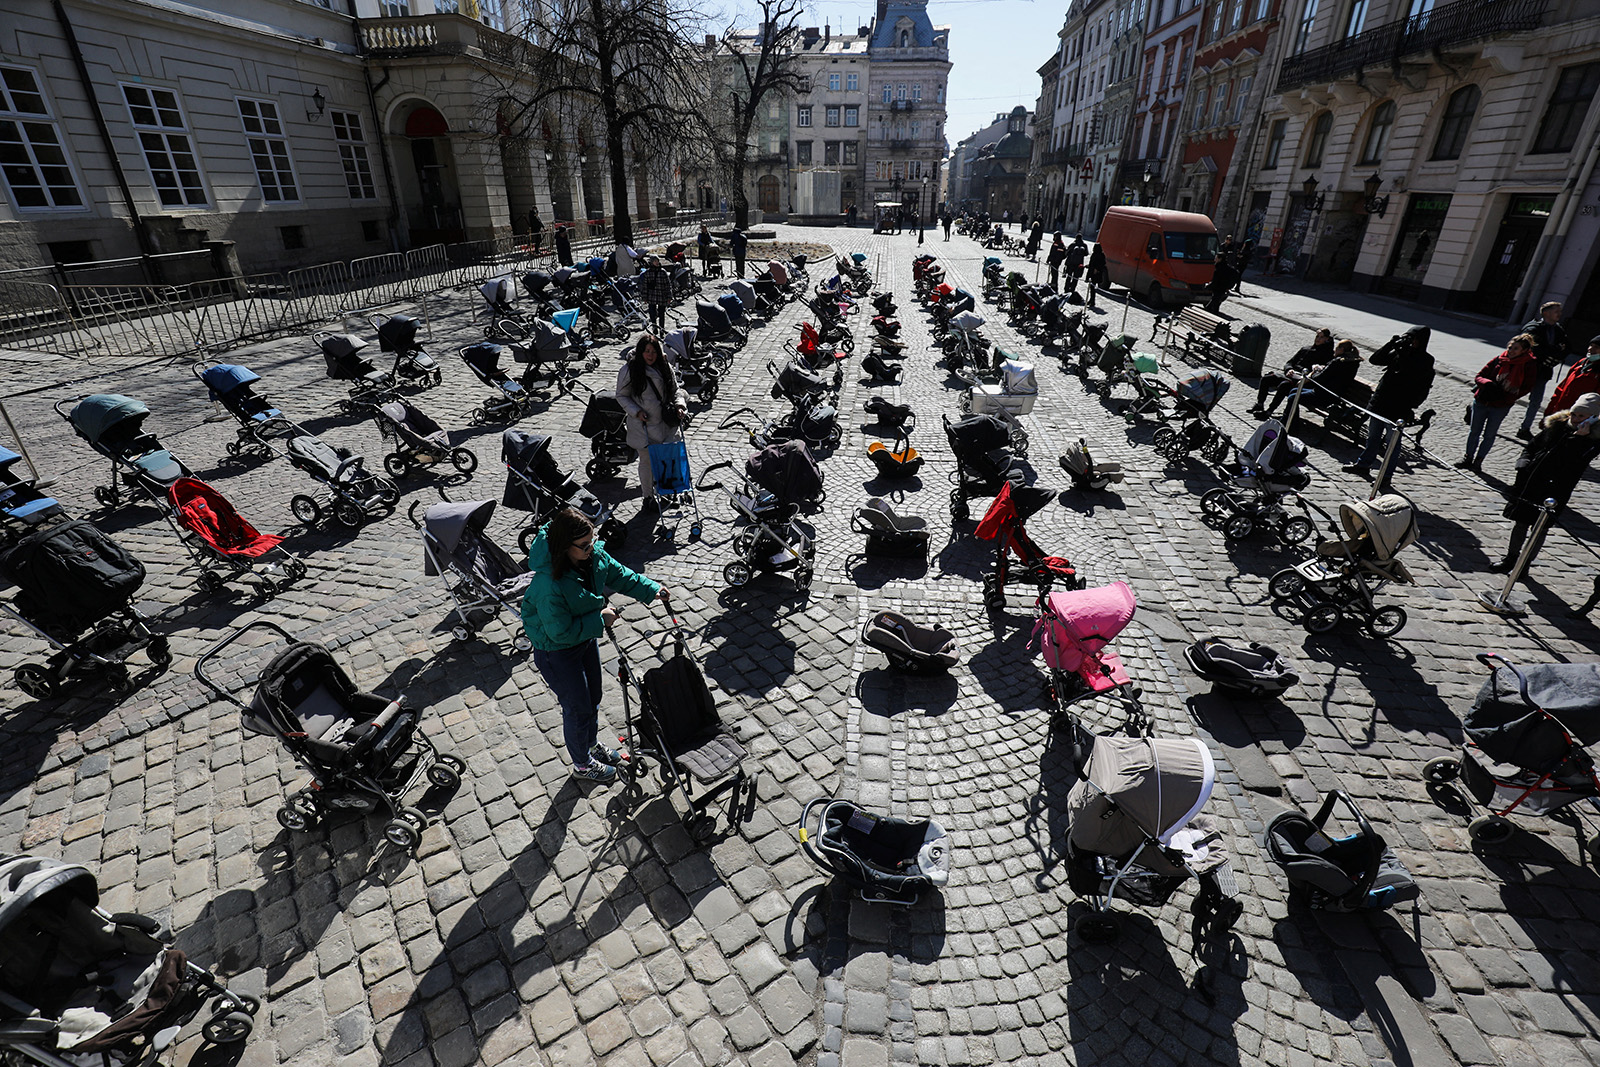 109 empty prams placed in the center of Lviv during the "Price of War" campaign organized by local activists and authorities to highlight the large number of children killed during Russia's invasion of Ukraine, in Lviv, on March 18.